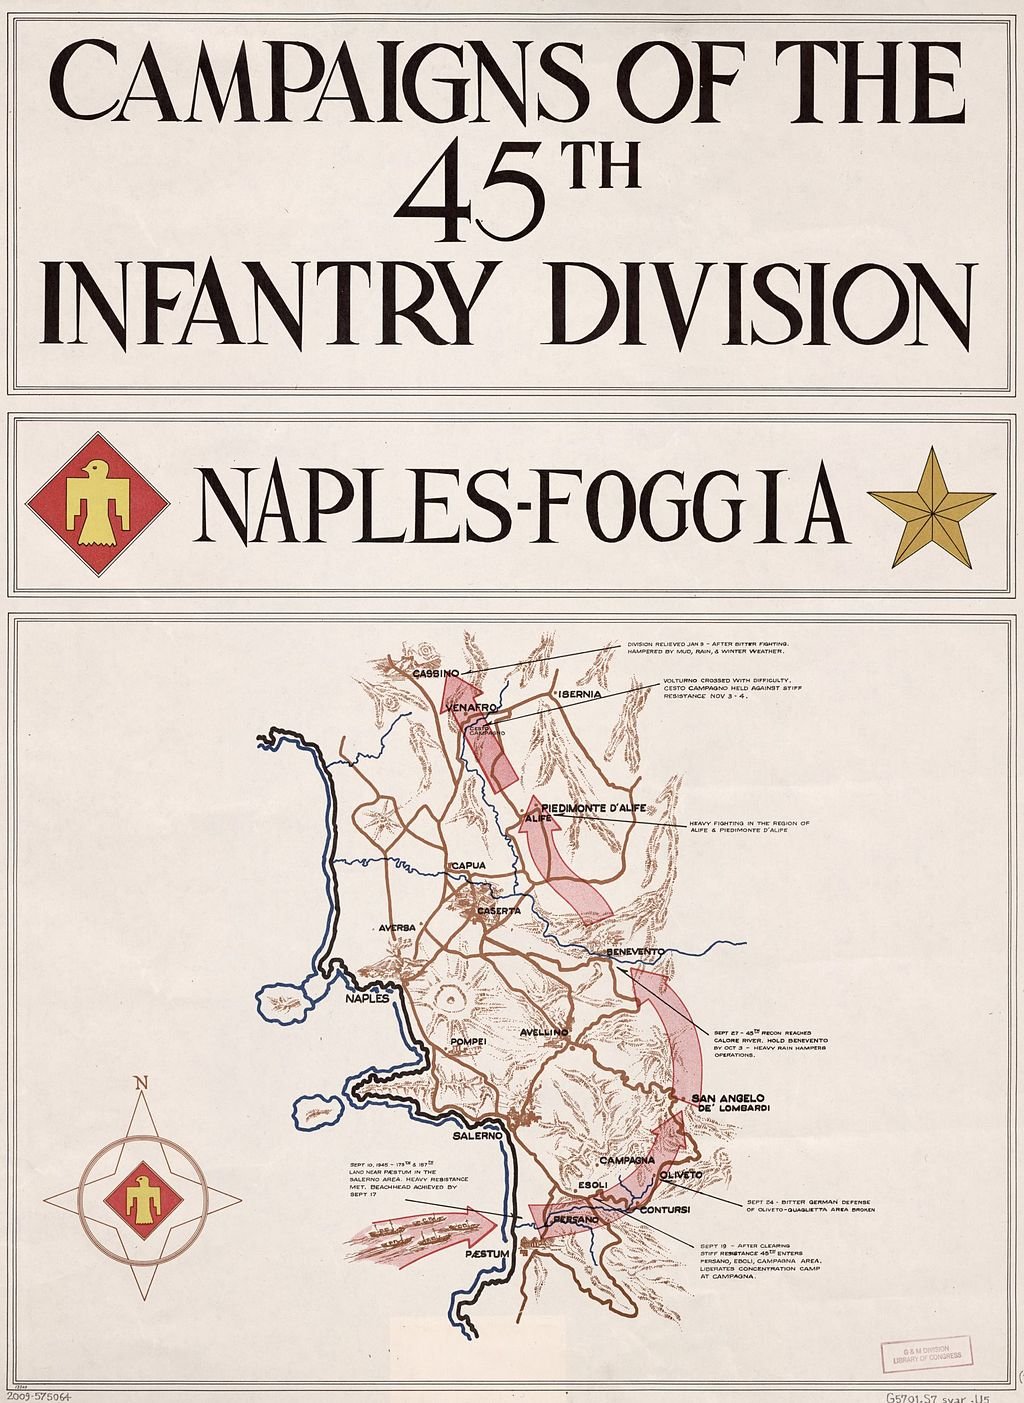 45th_Infantry_Division_campaign_Naples.jpg